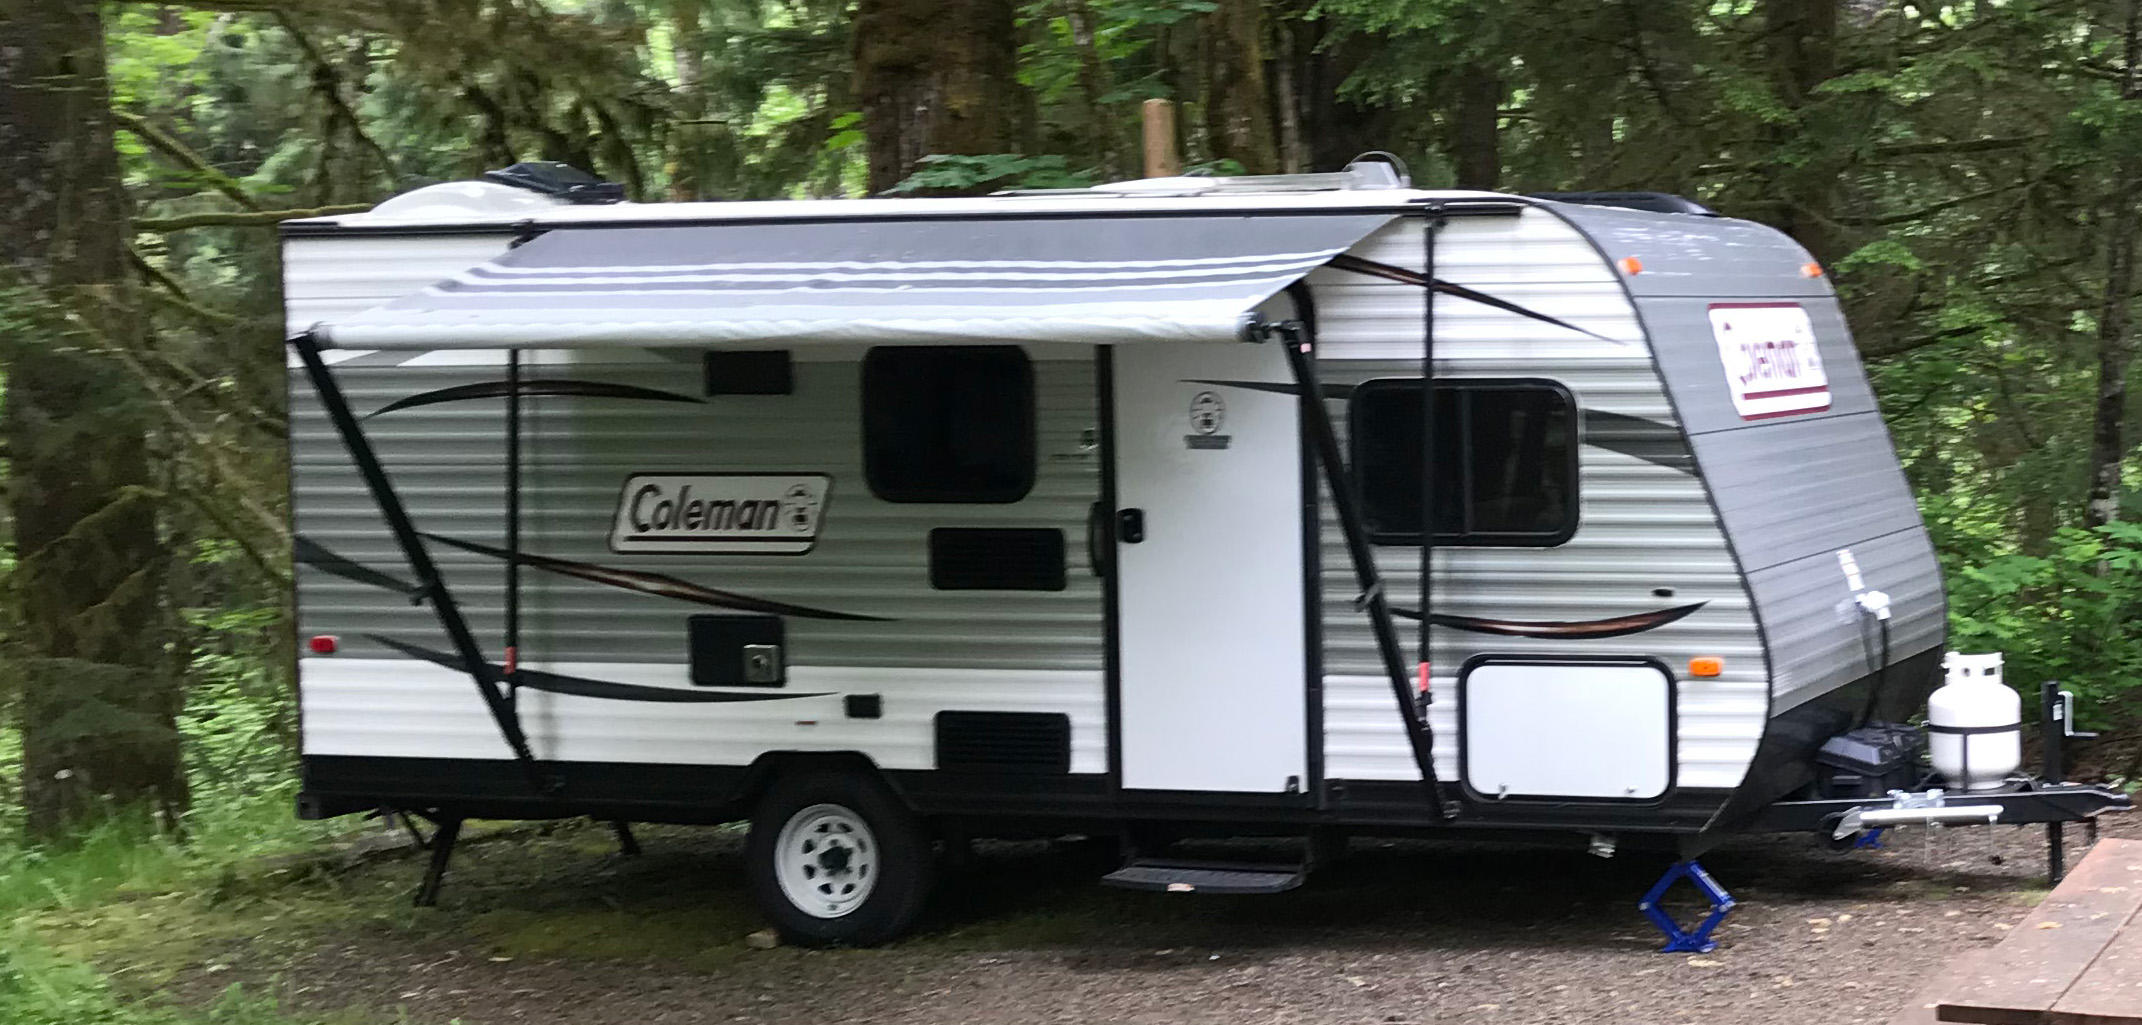 a Coleman trailer parked in the woods